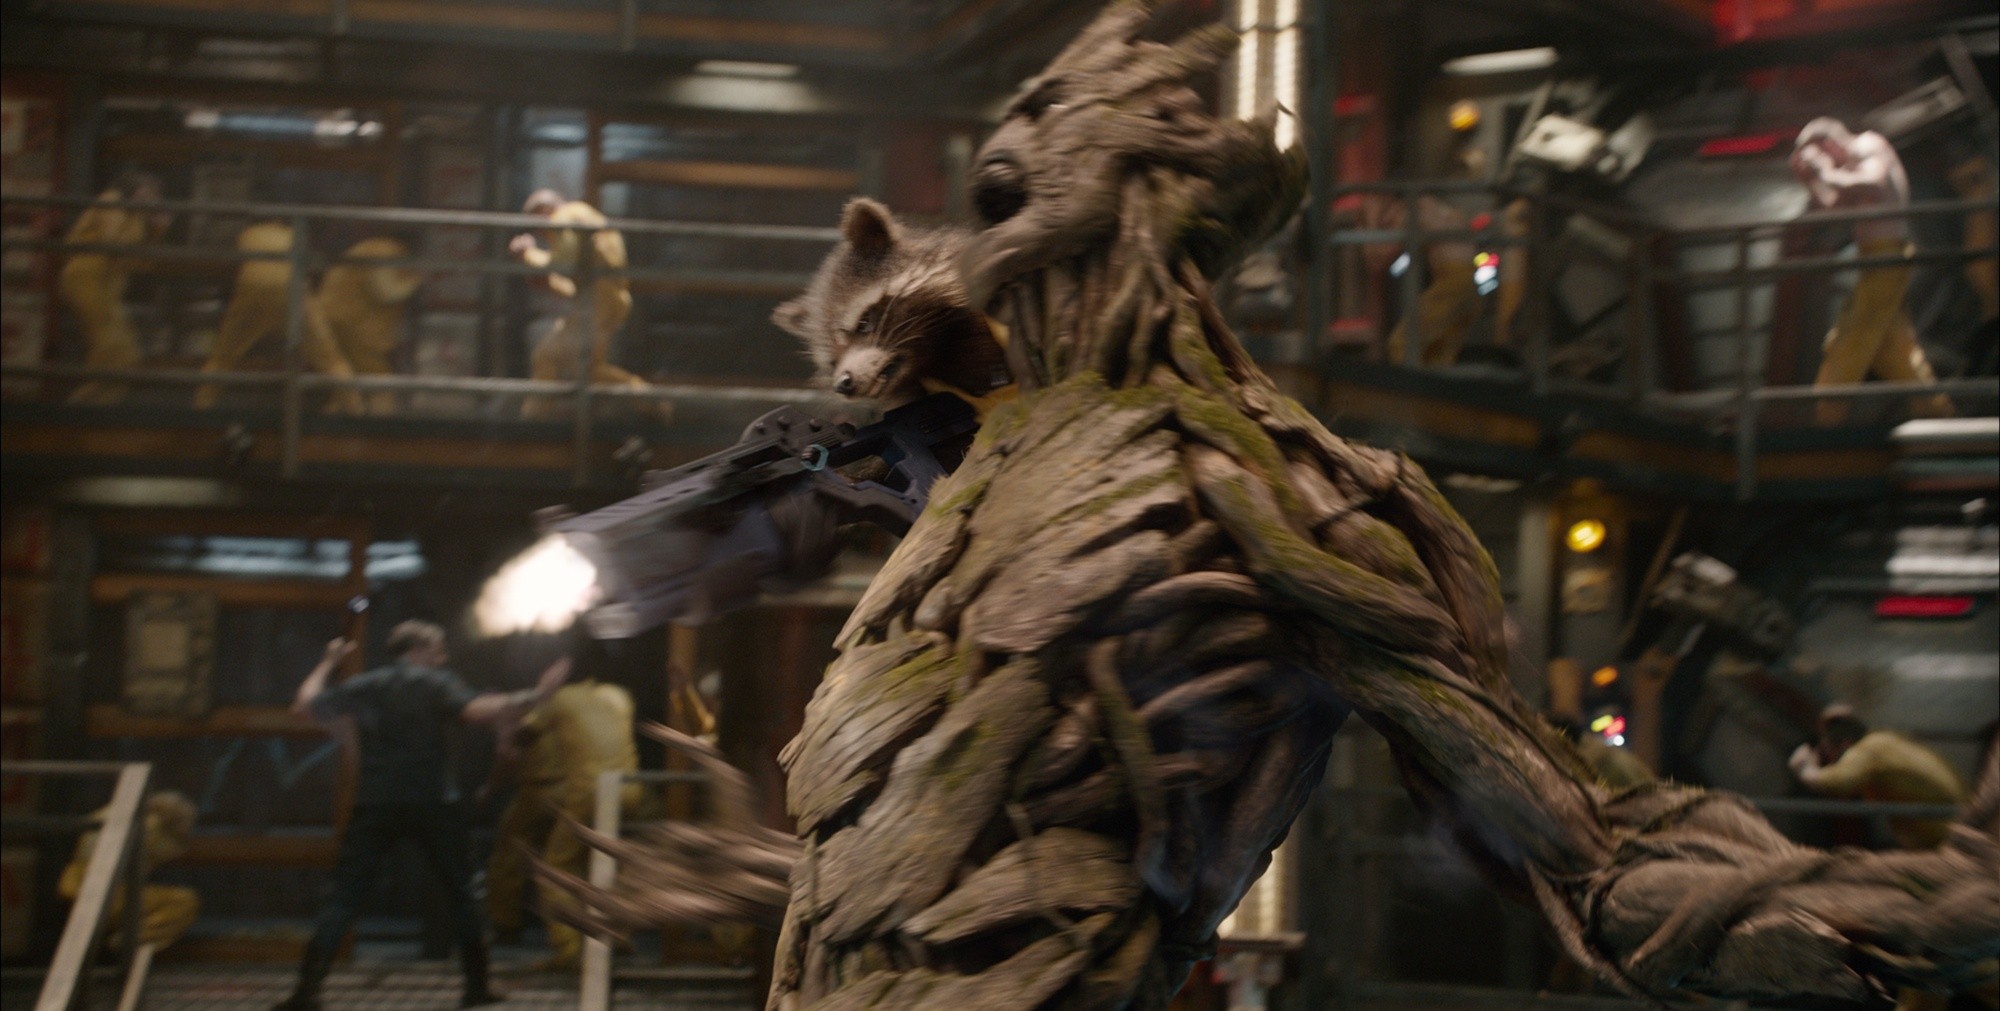 Groot and Rocket Raccoon from Marvel Studios' Guardians of the Galaxy (2014)